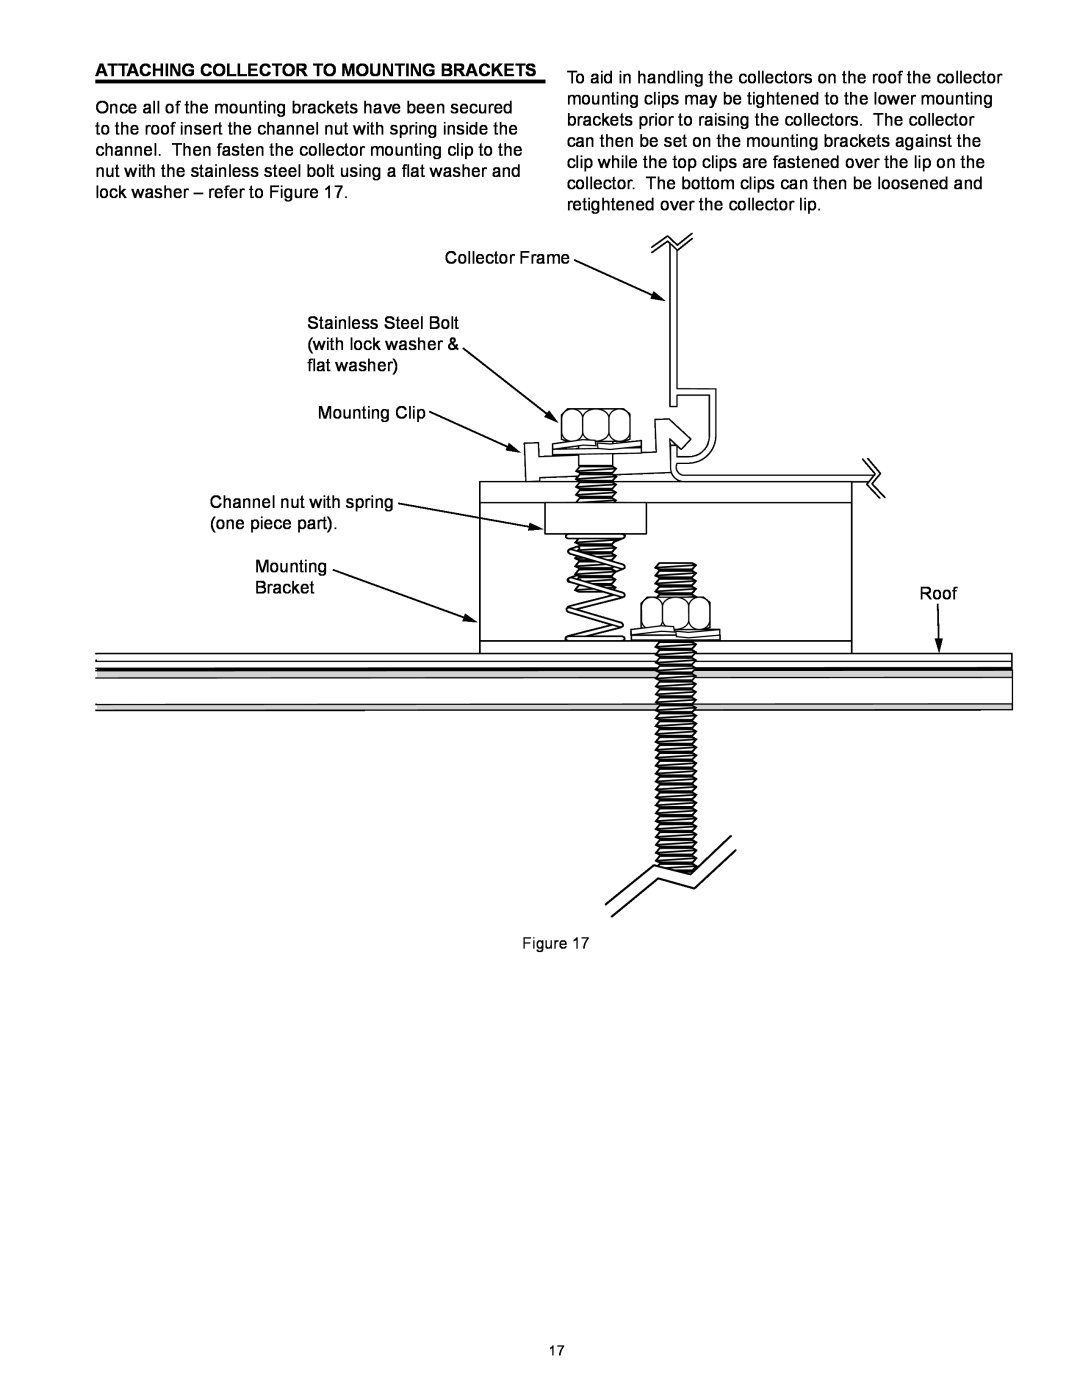 American Water Heater 318281-000 instruction manual Attaching Collector To Mounting Brackets 